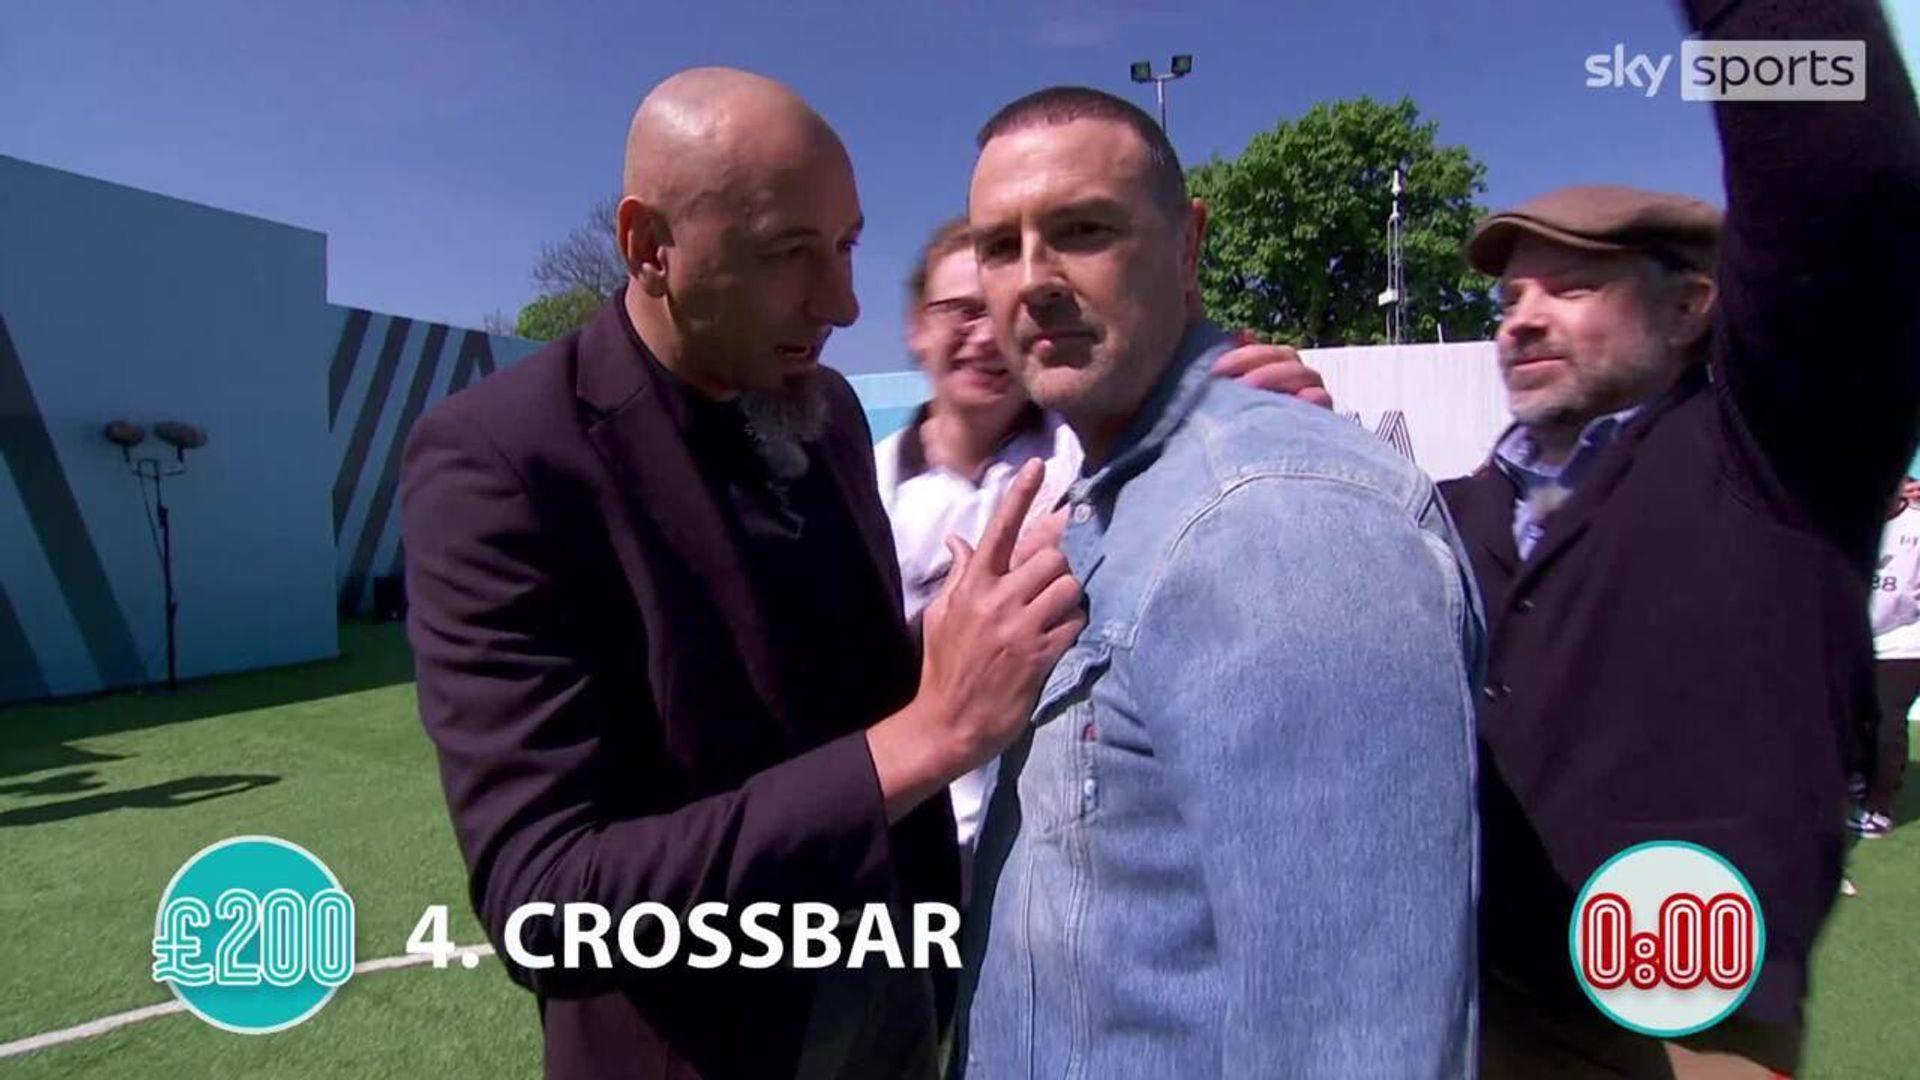 Paddy McGuinness nails Soccer AM Pro-AM volley and crossbar!